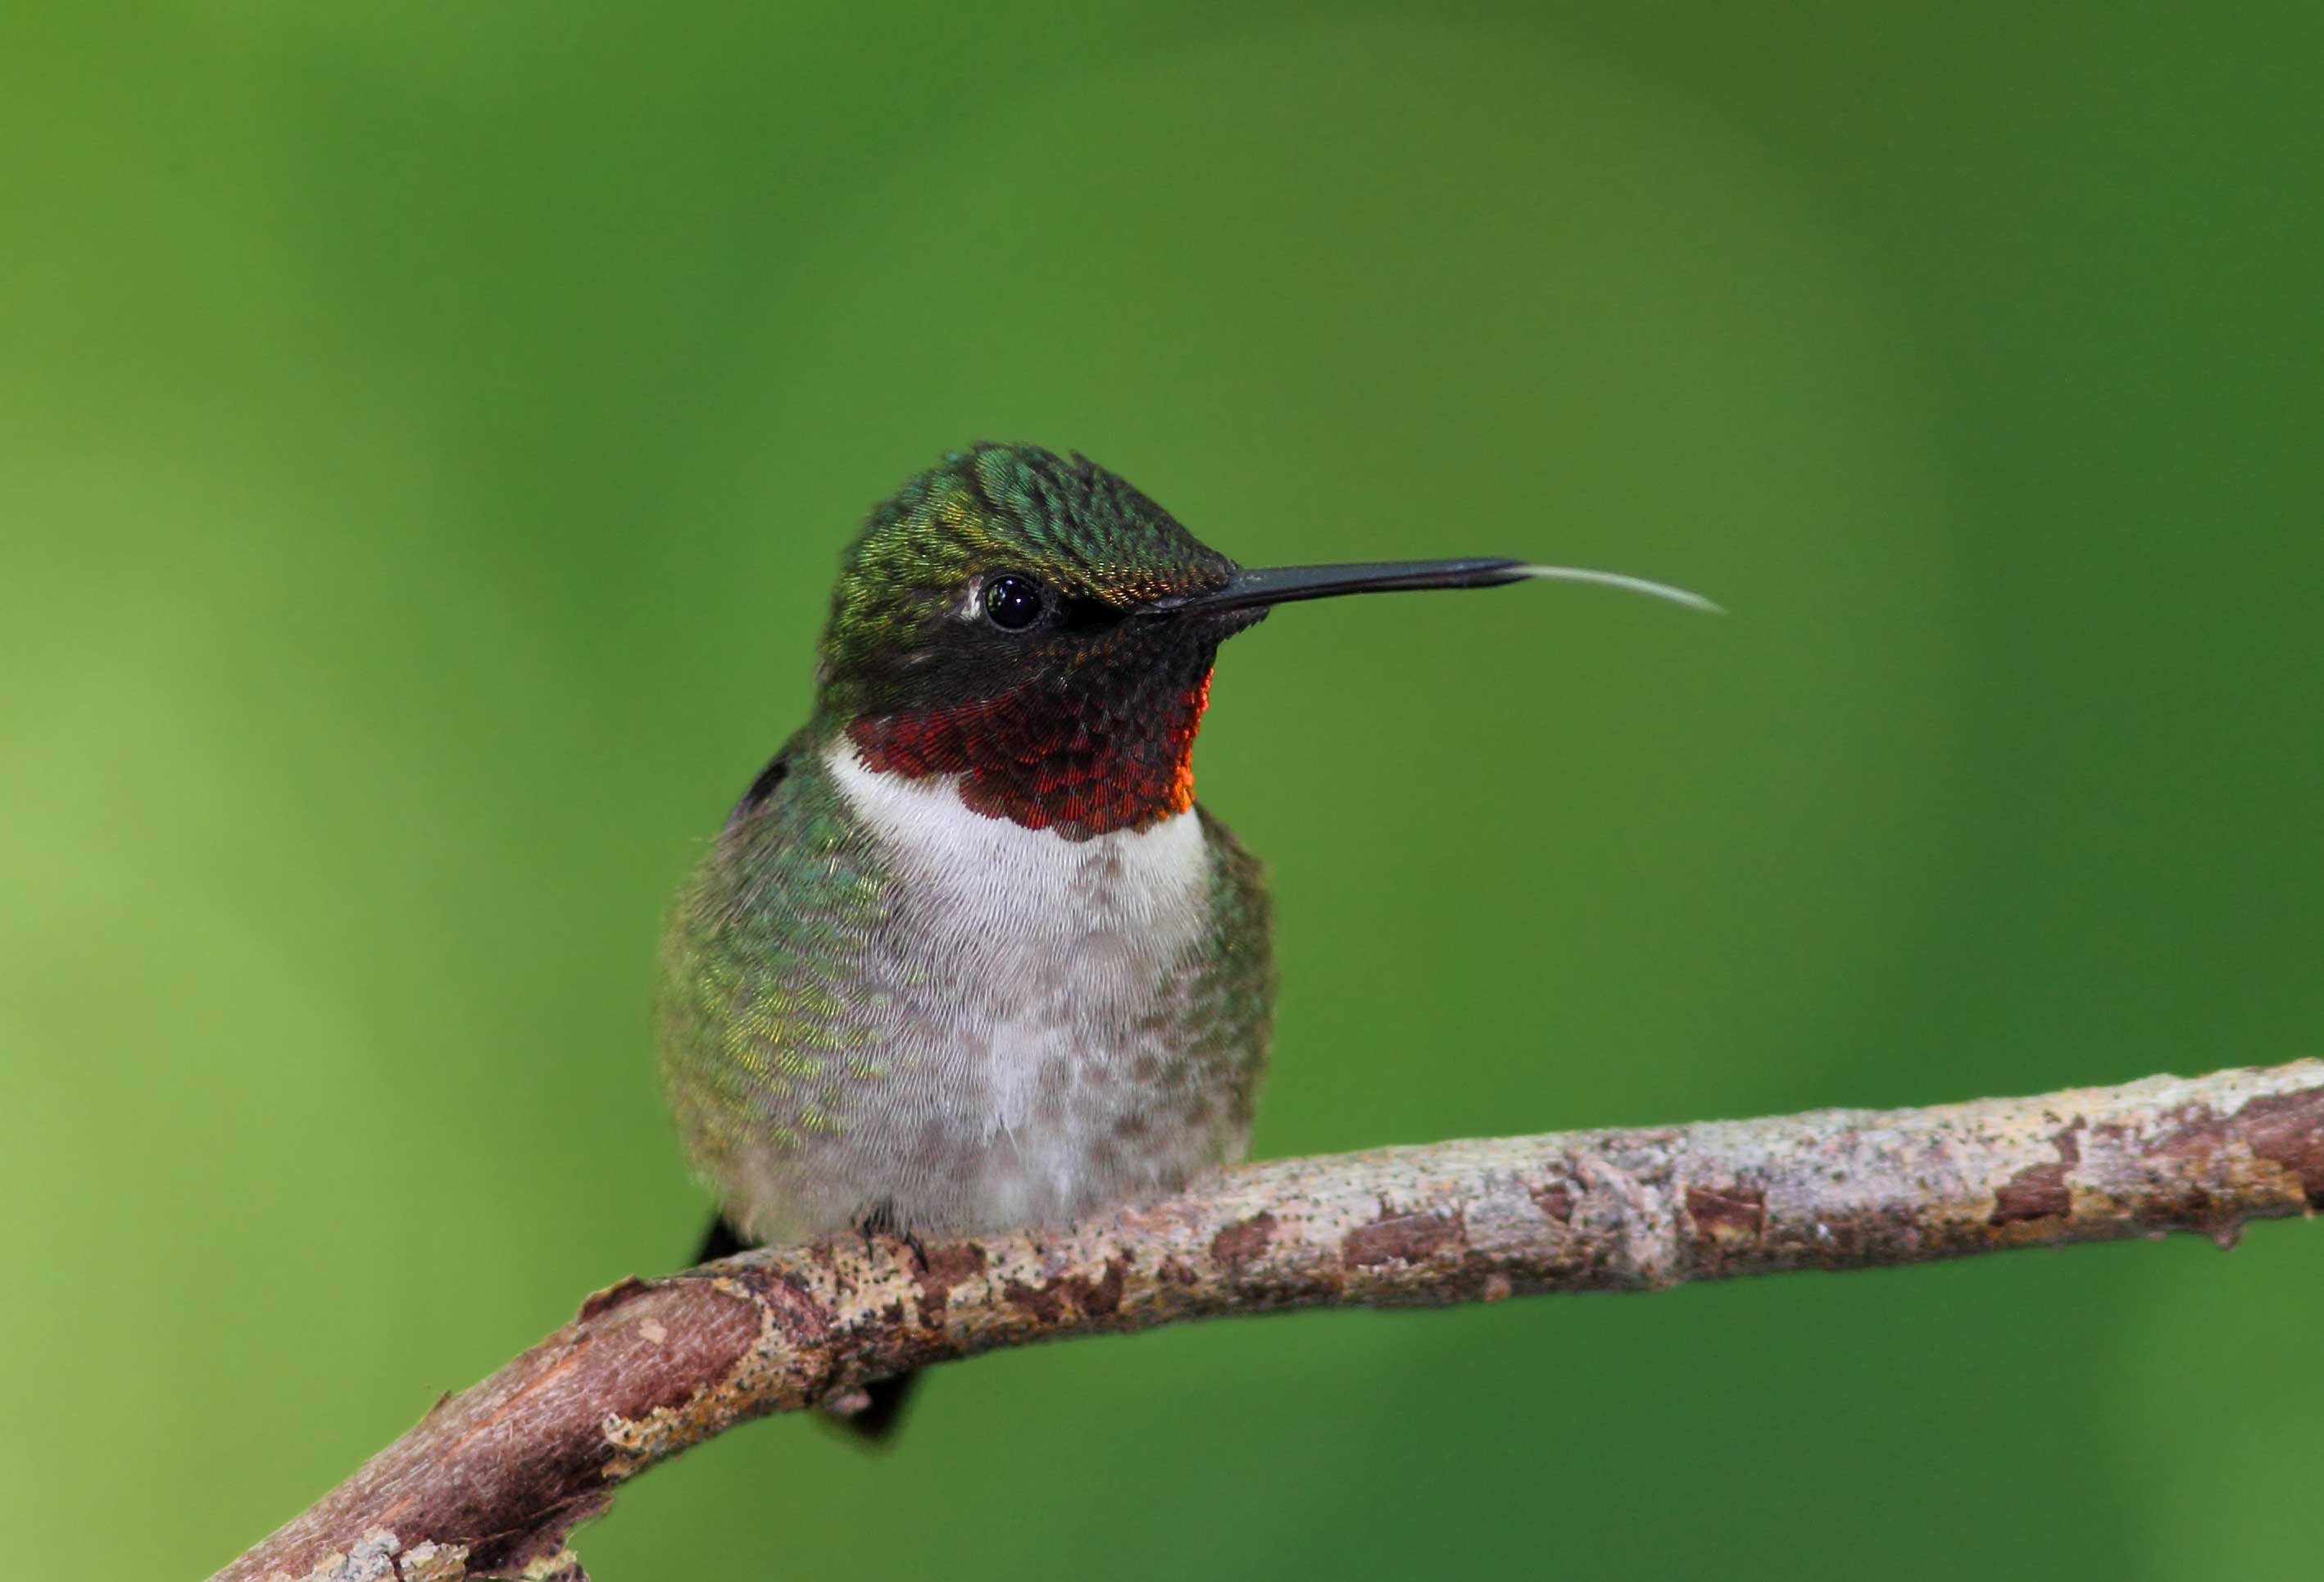 Ruby-throated hummingbird on a branch